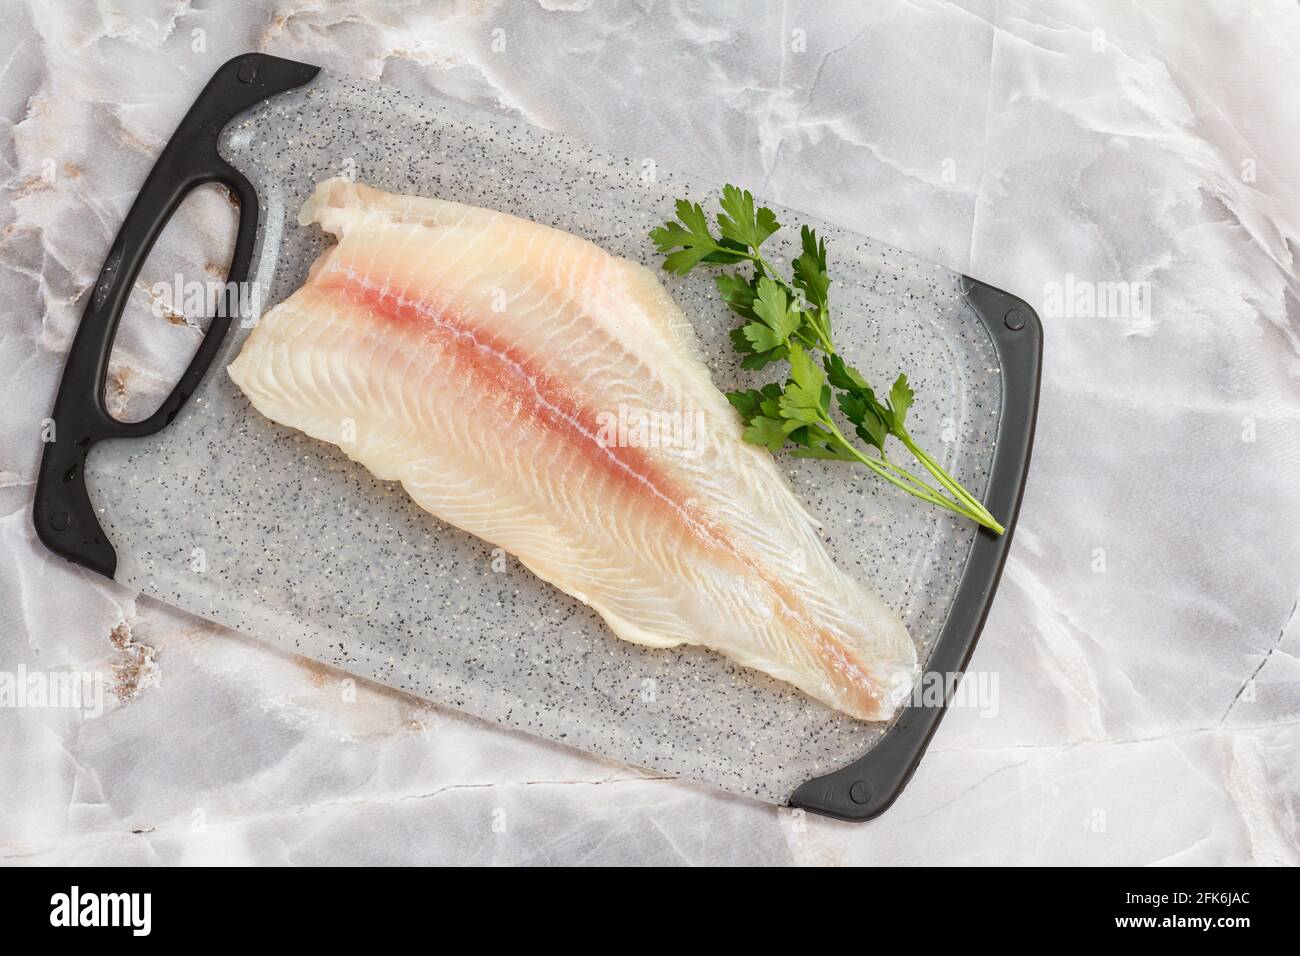 Fillet of raw pangasius fish with parsley leaves on cutting board. Top view. Stock Photo